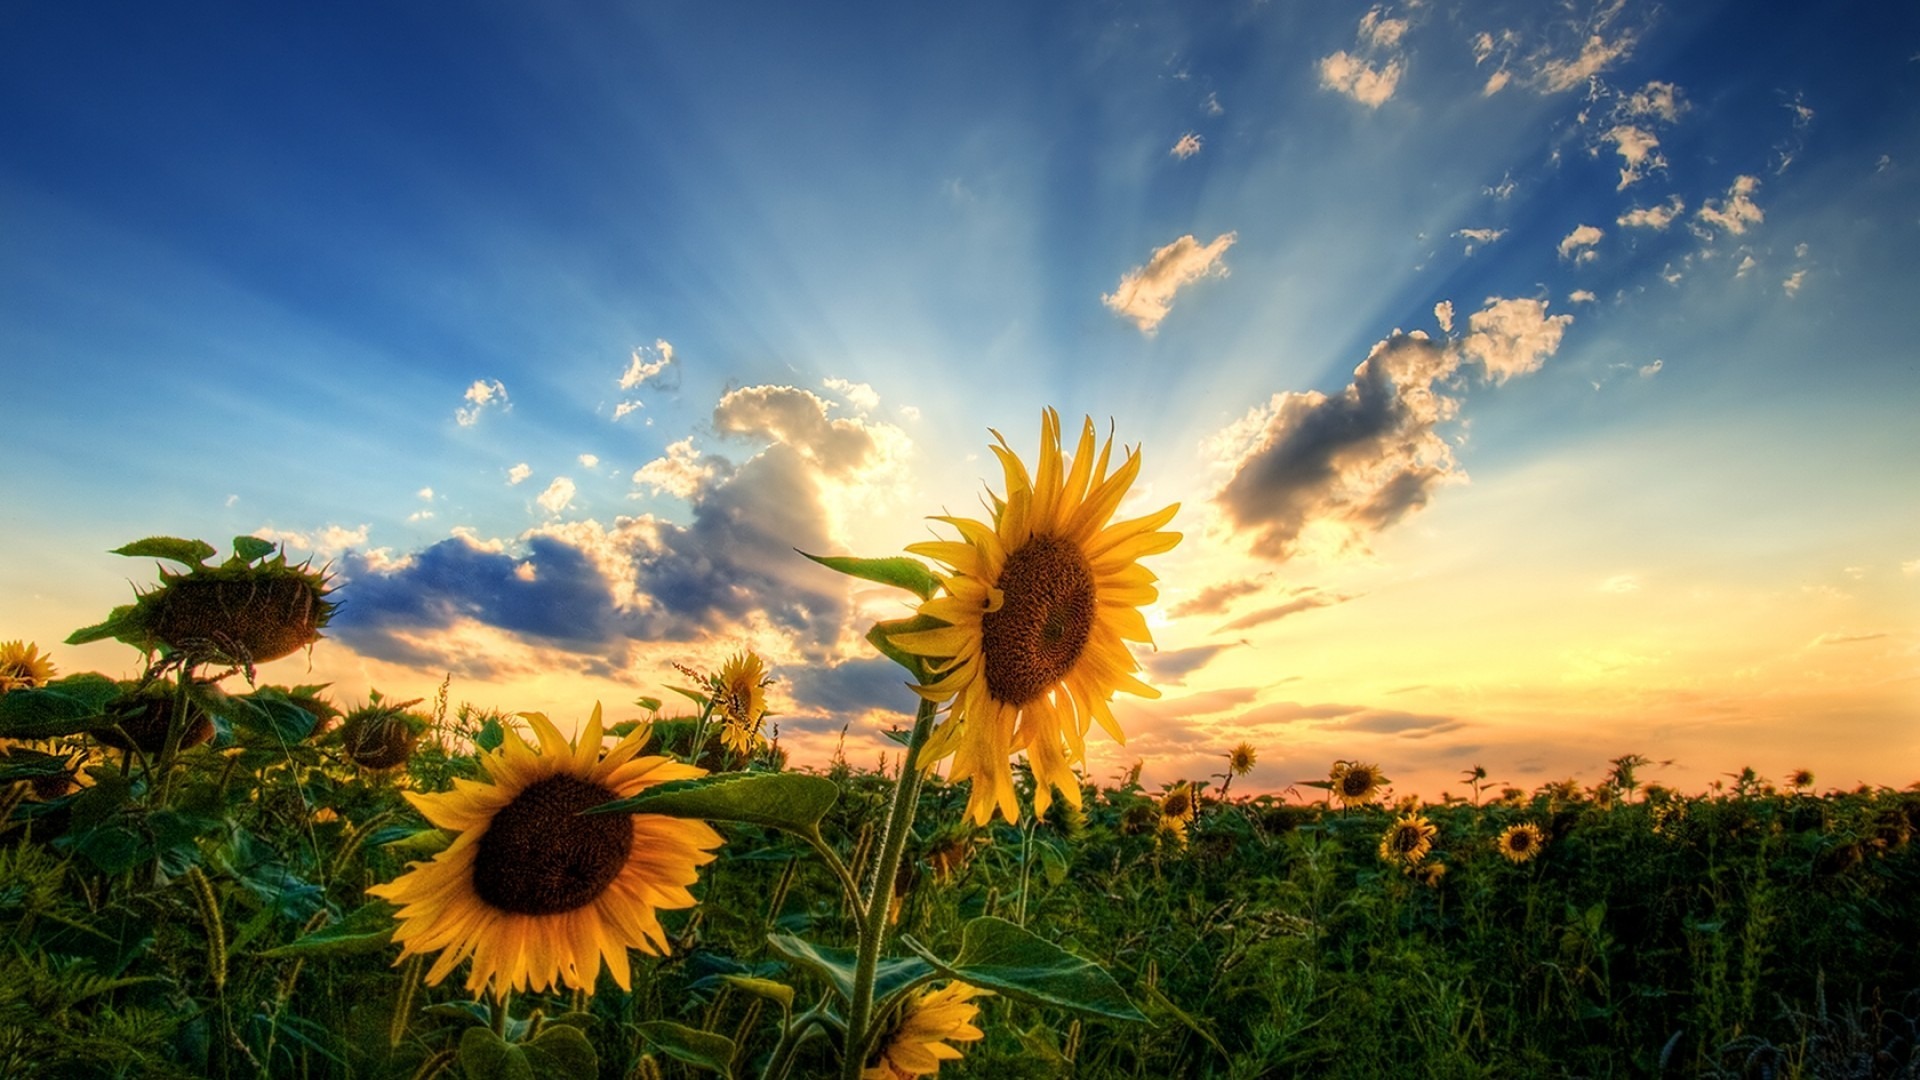 Free Download Sunflower Wallpapers Best Wallpapers 1920x1080 For